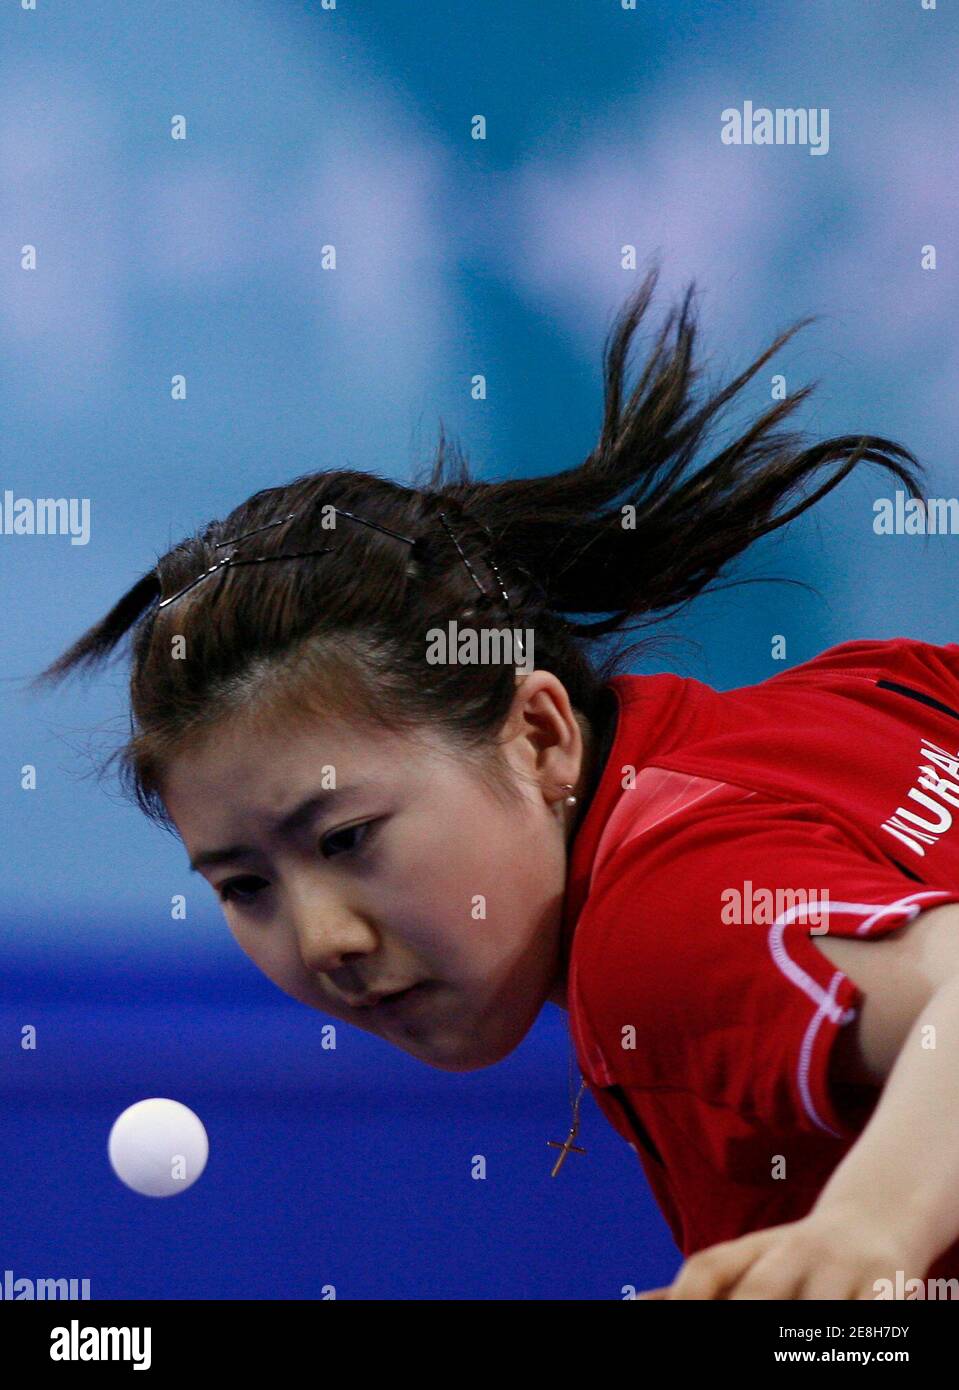 Ai Fukuhara of Japan plays a shot during her women's singles third round table tennis match against Melek Hu of Turkey at the Beijing 2008 Olympic Games August 20, 2008.   REUTERS/Beawiharta (CHINA) Stock Photo